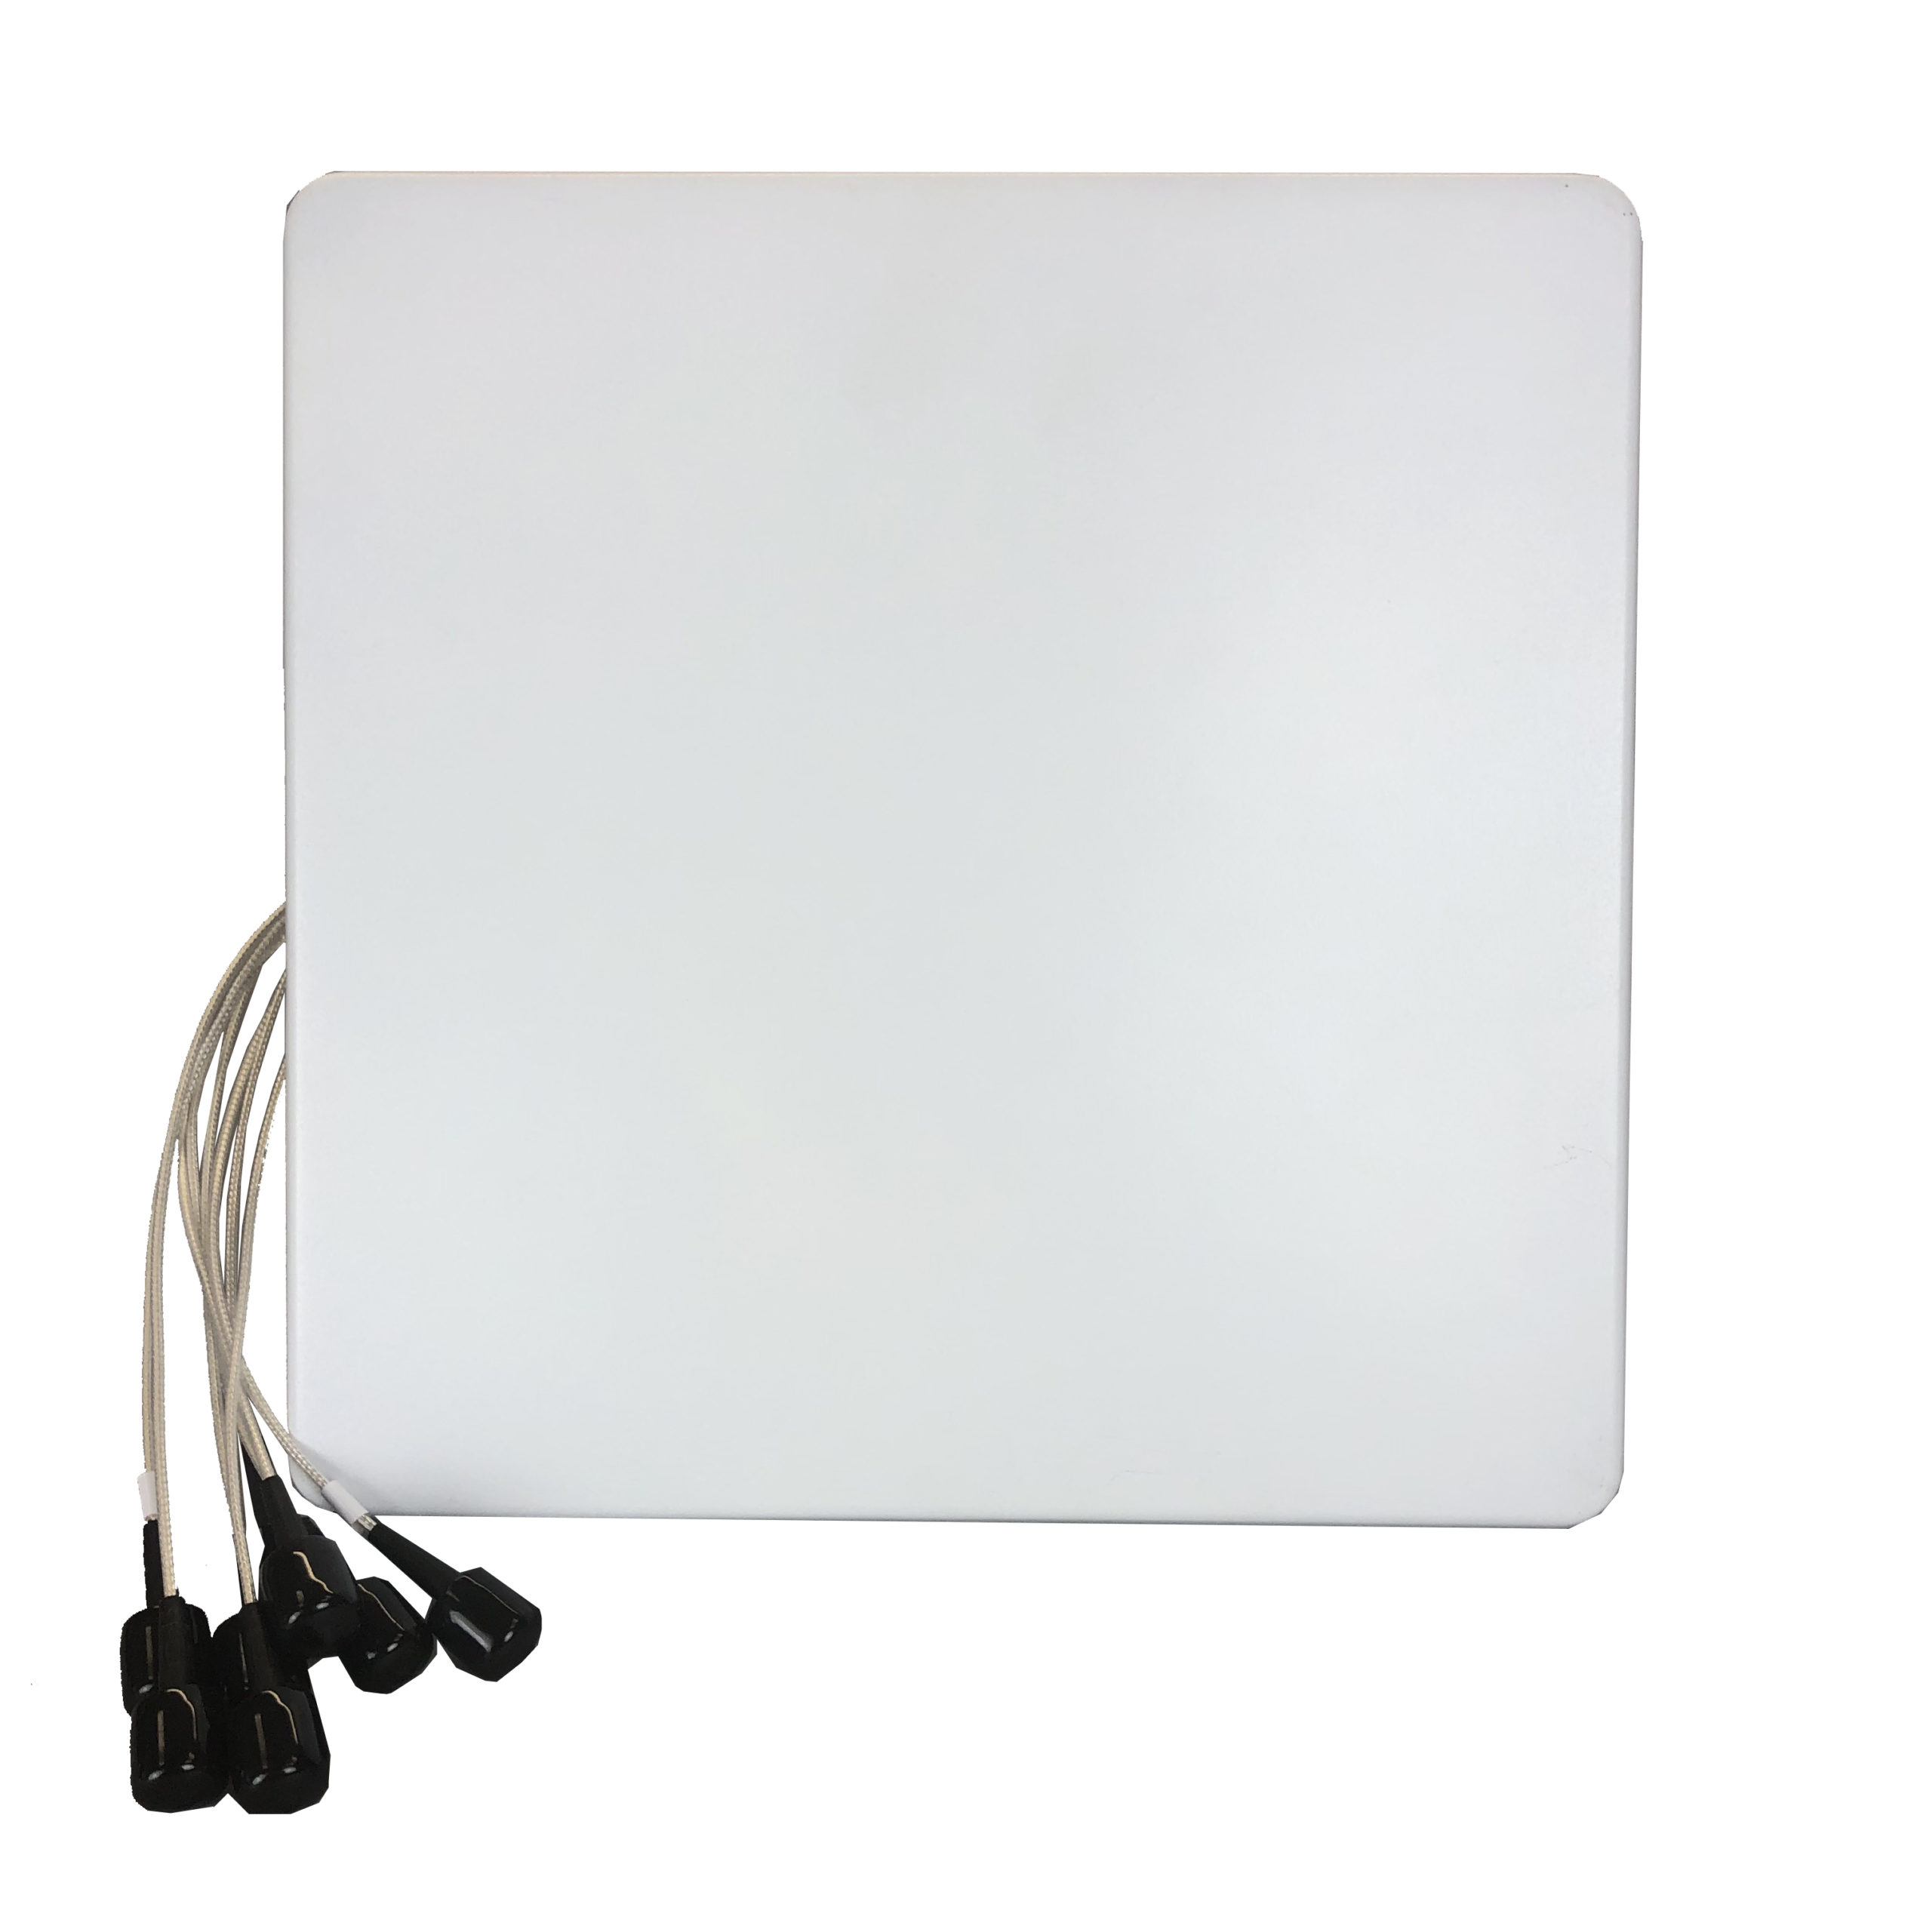 2.4/5GHz 6 dBi Wi-Fi Directional (H:65/60/V:65/55) Antenna with 8 RPSMA Connectors